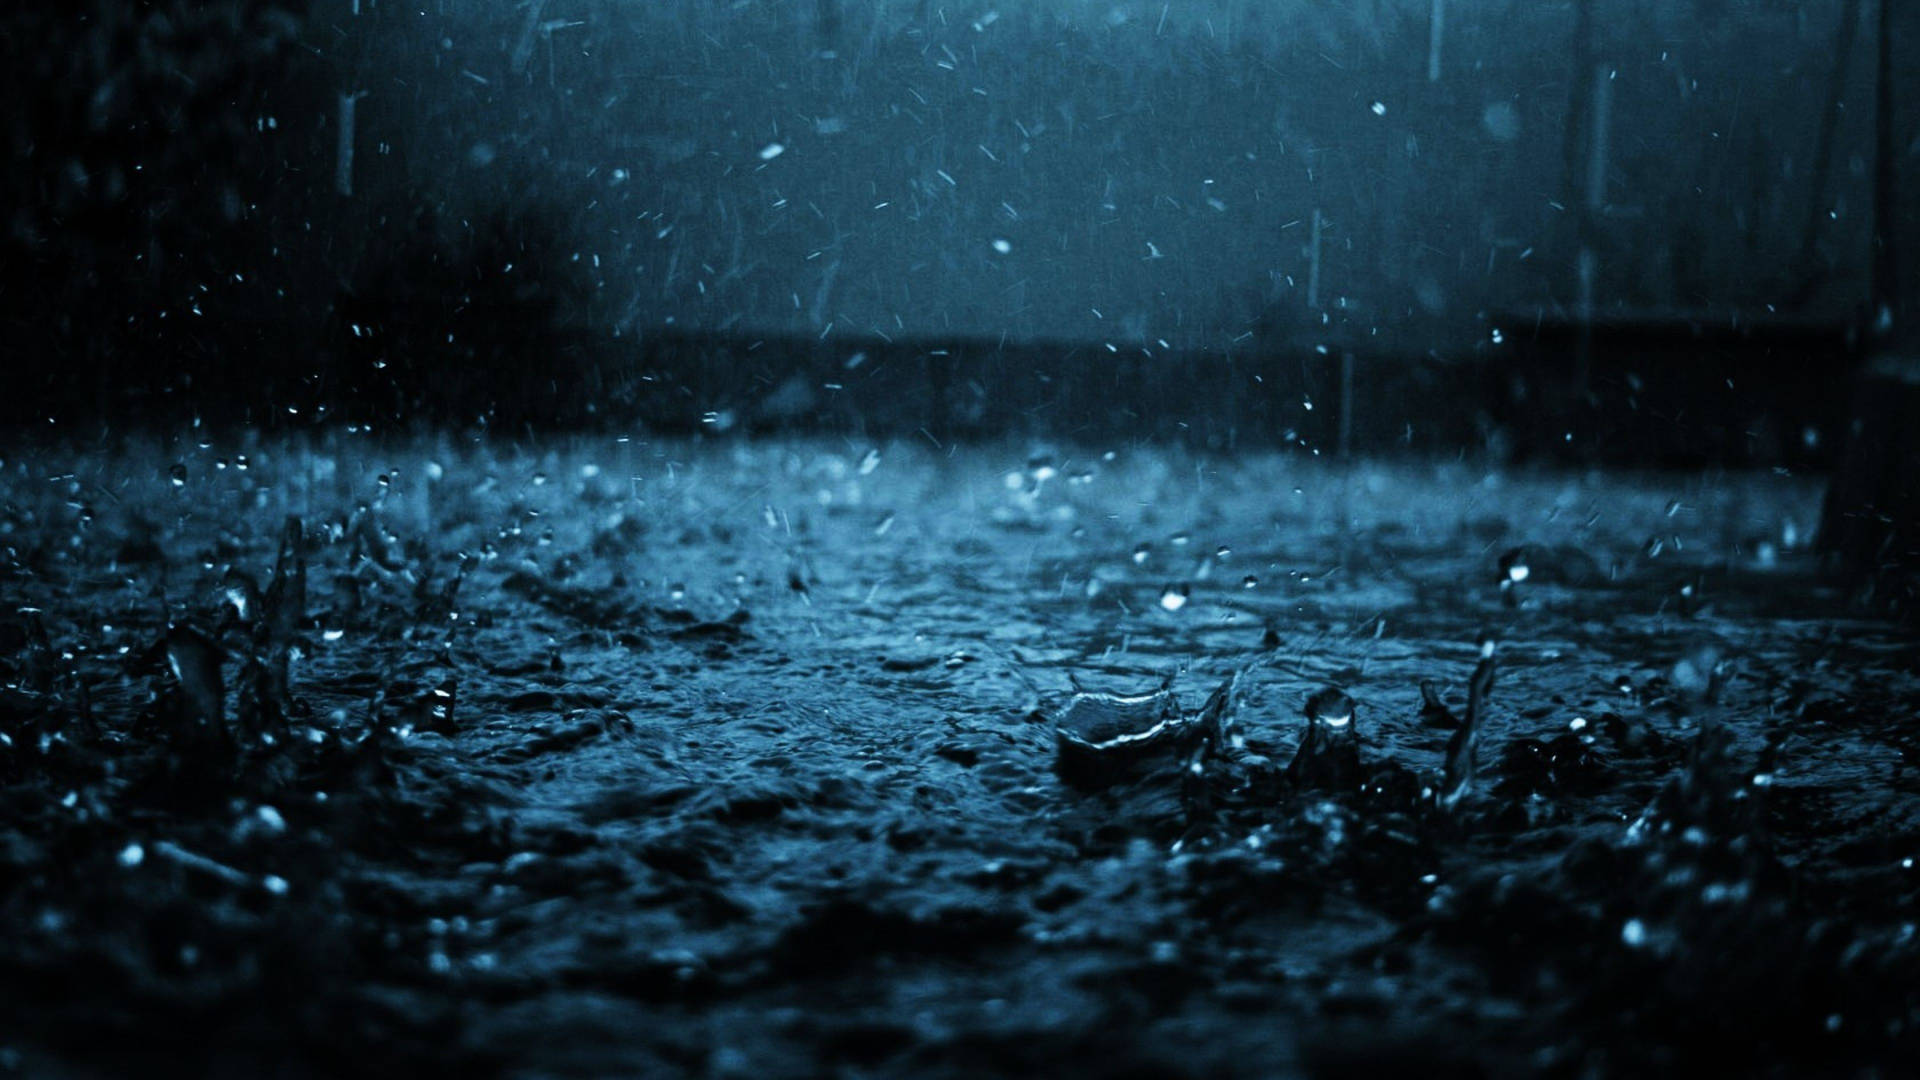 Download Rain wallpapers for mobile phone free Rain HD pictures